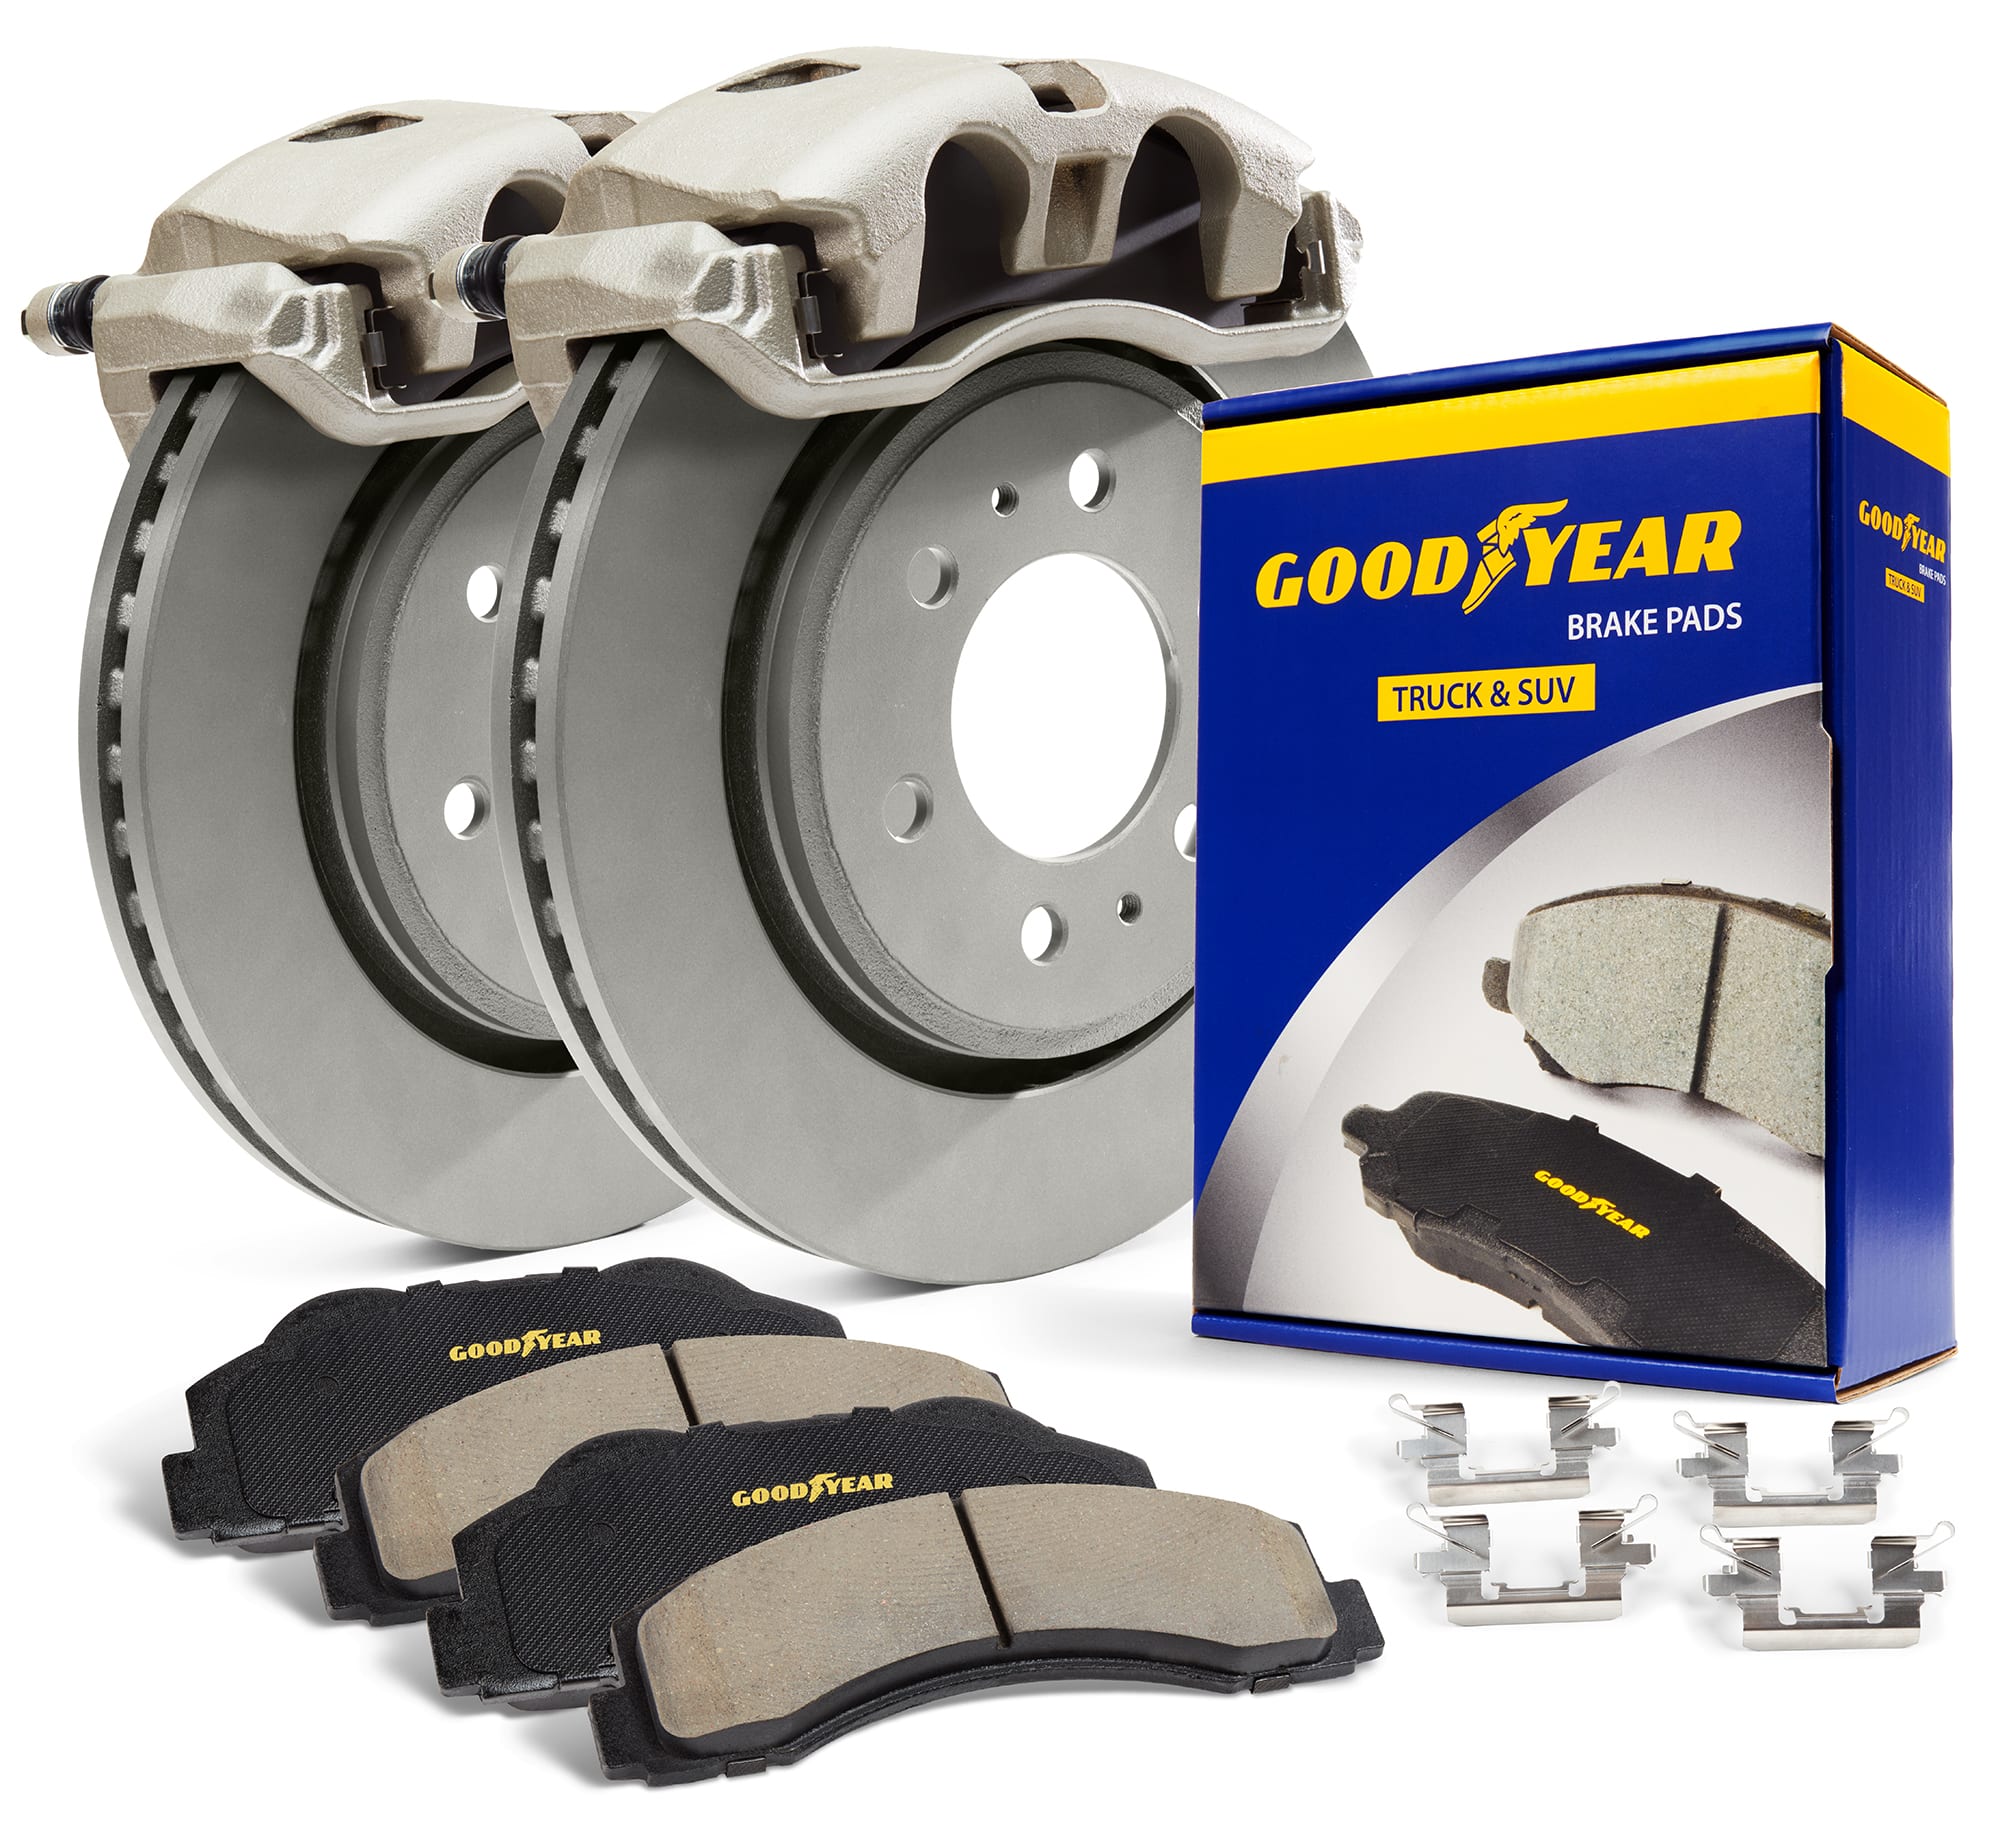 https://goodyearbrakes.com/wp-content/uploads/2020/03/Pads_Calipers_Rotors_Clips-Bundle_T_2000w.jpg